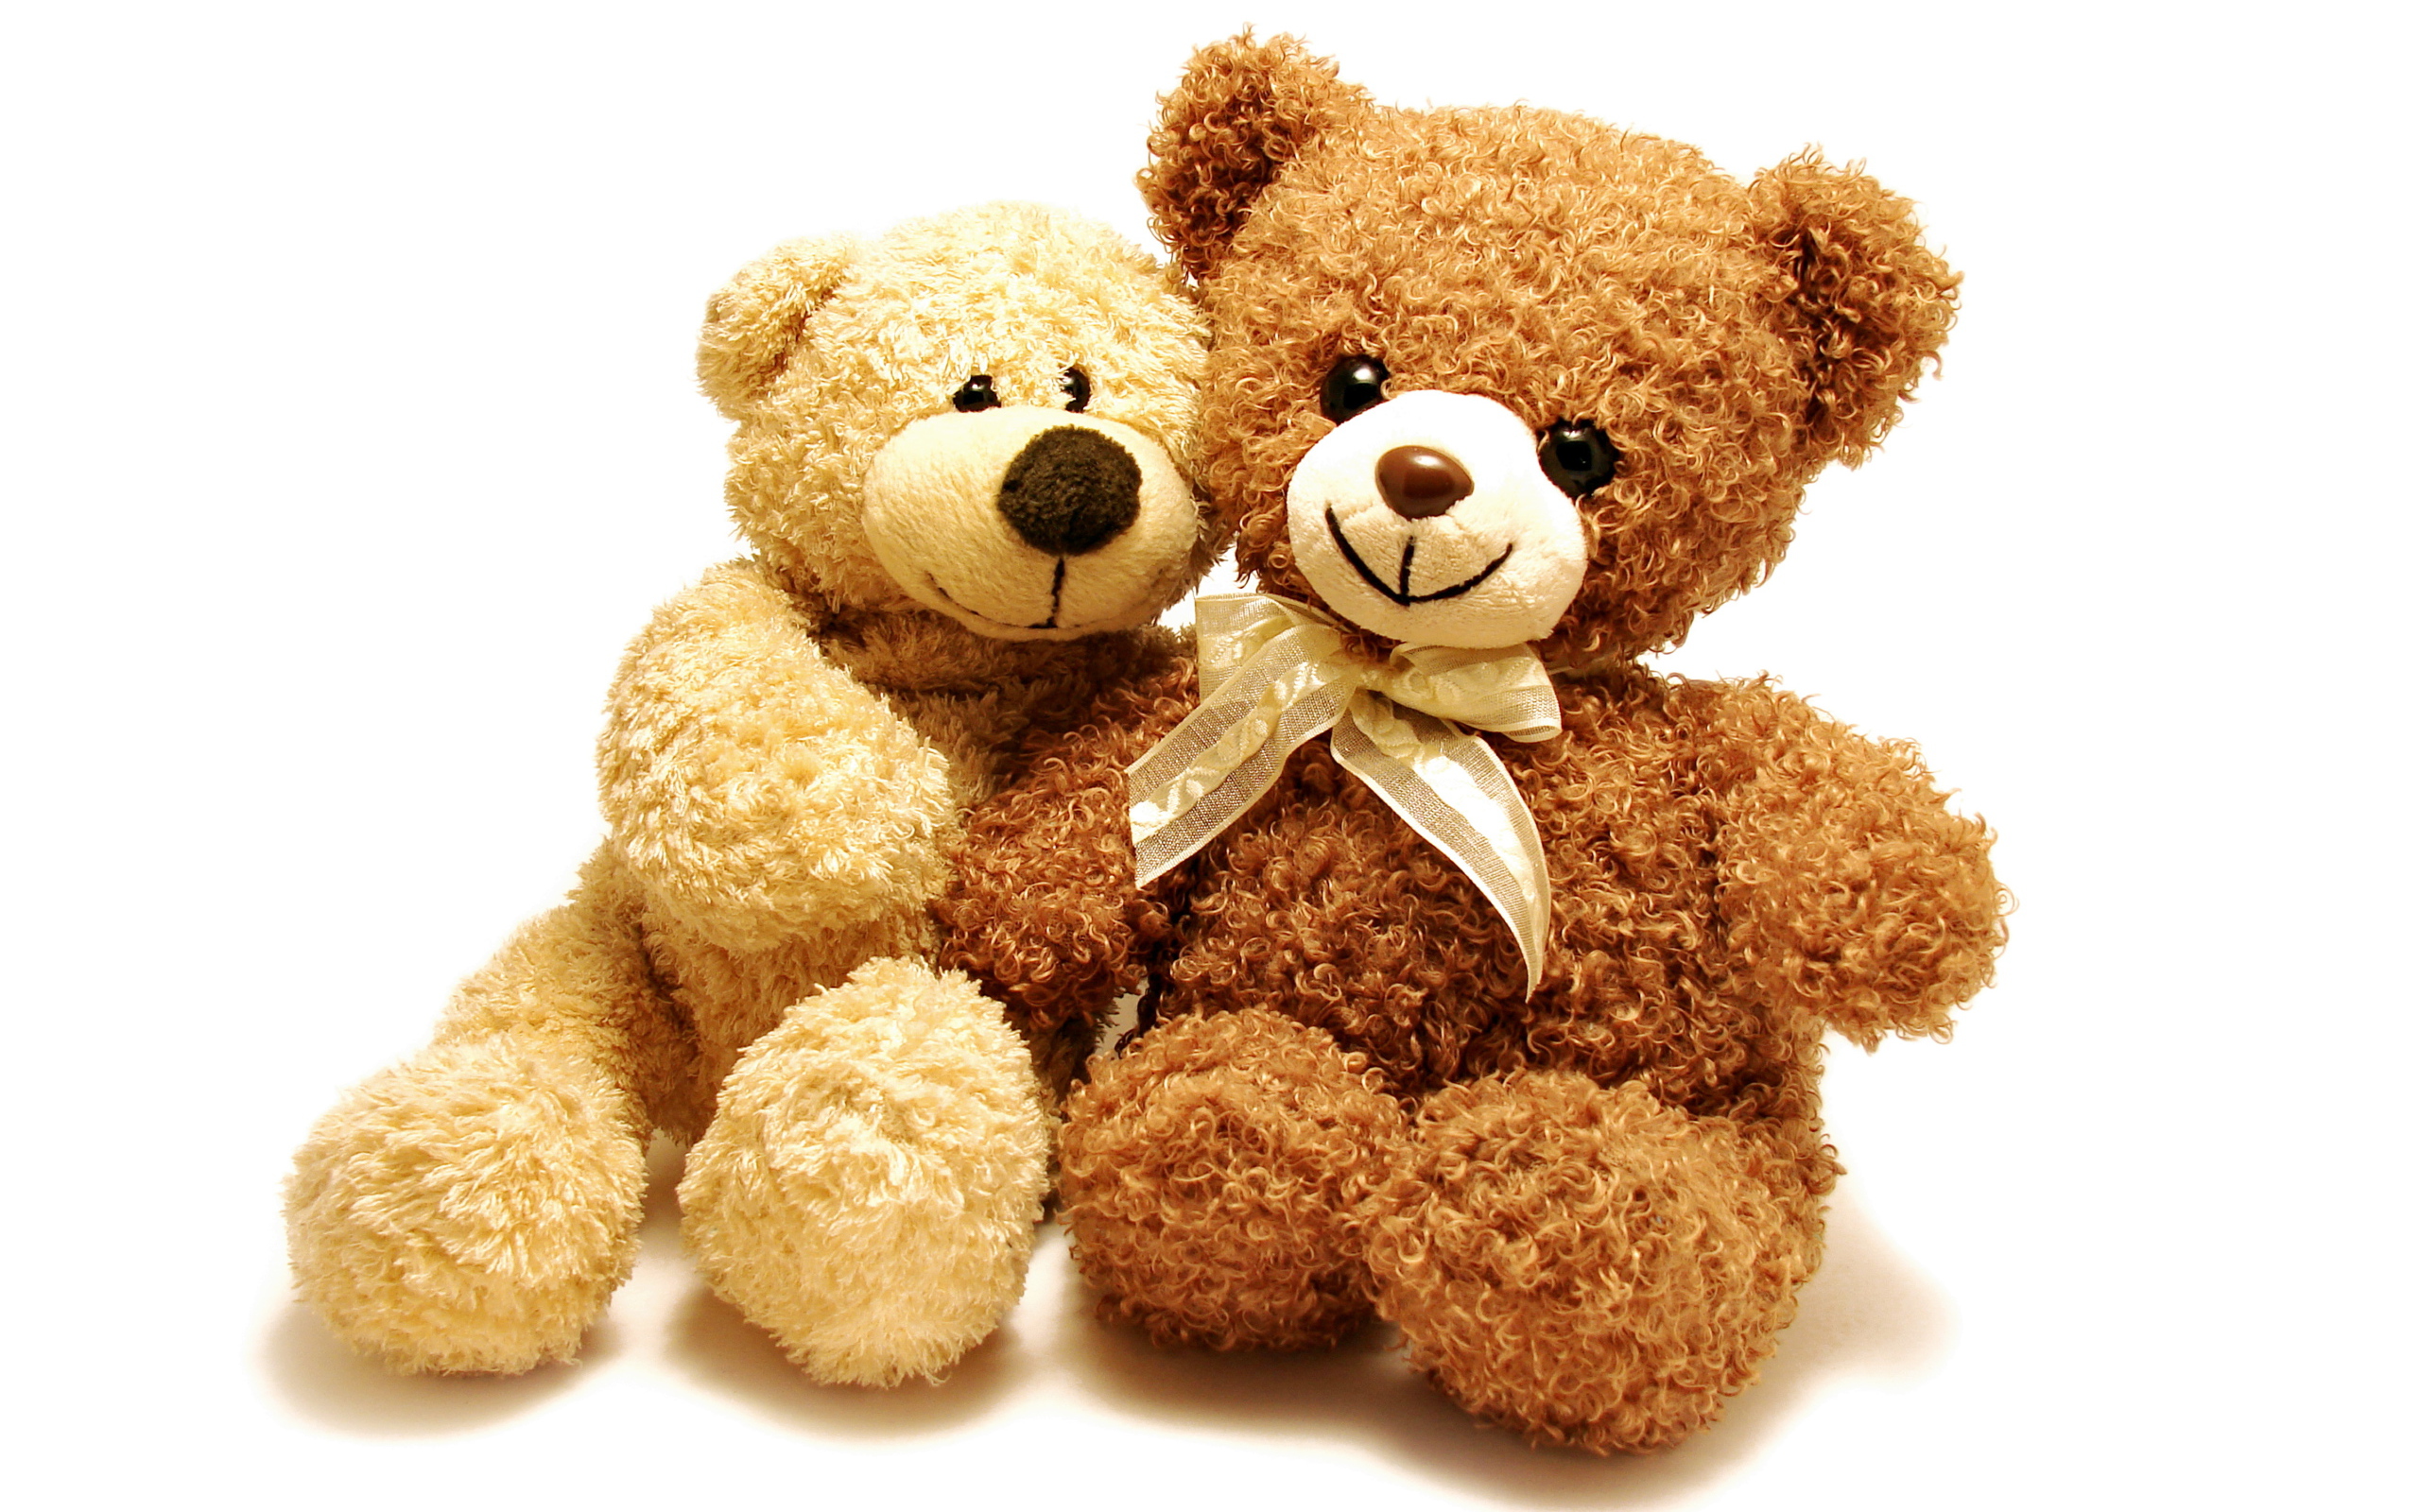 Two teddy bears on a white background